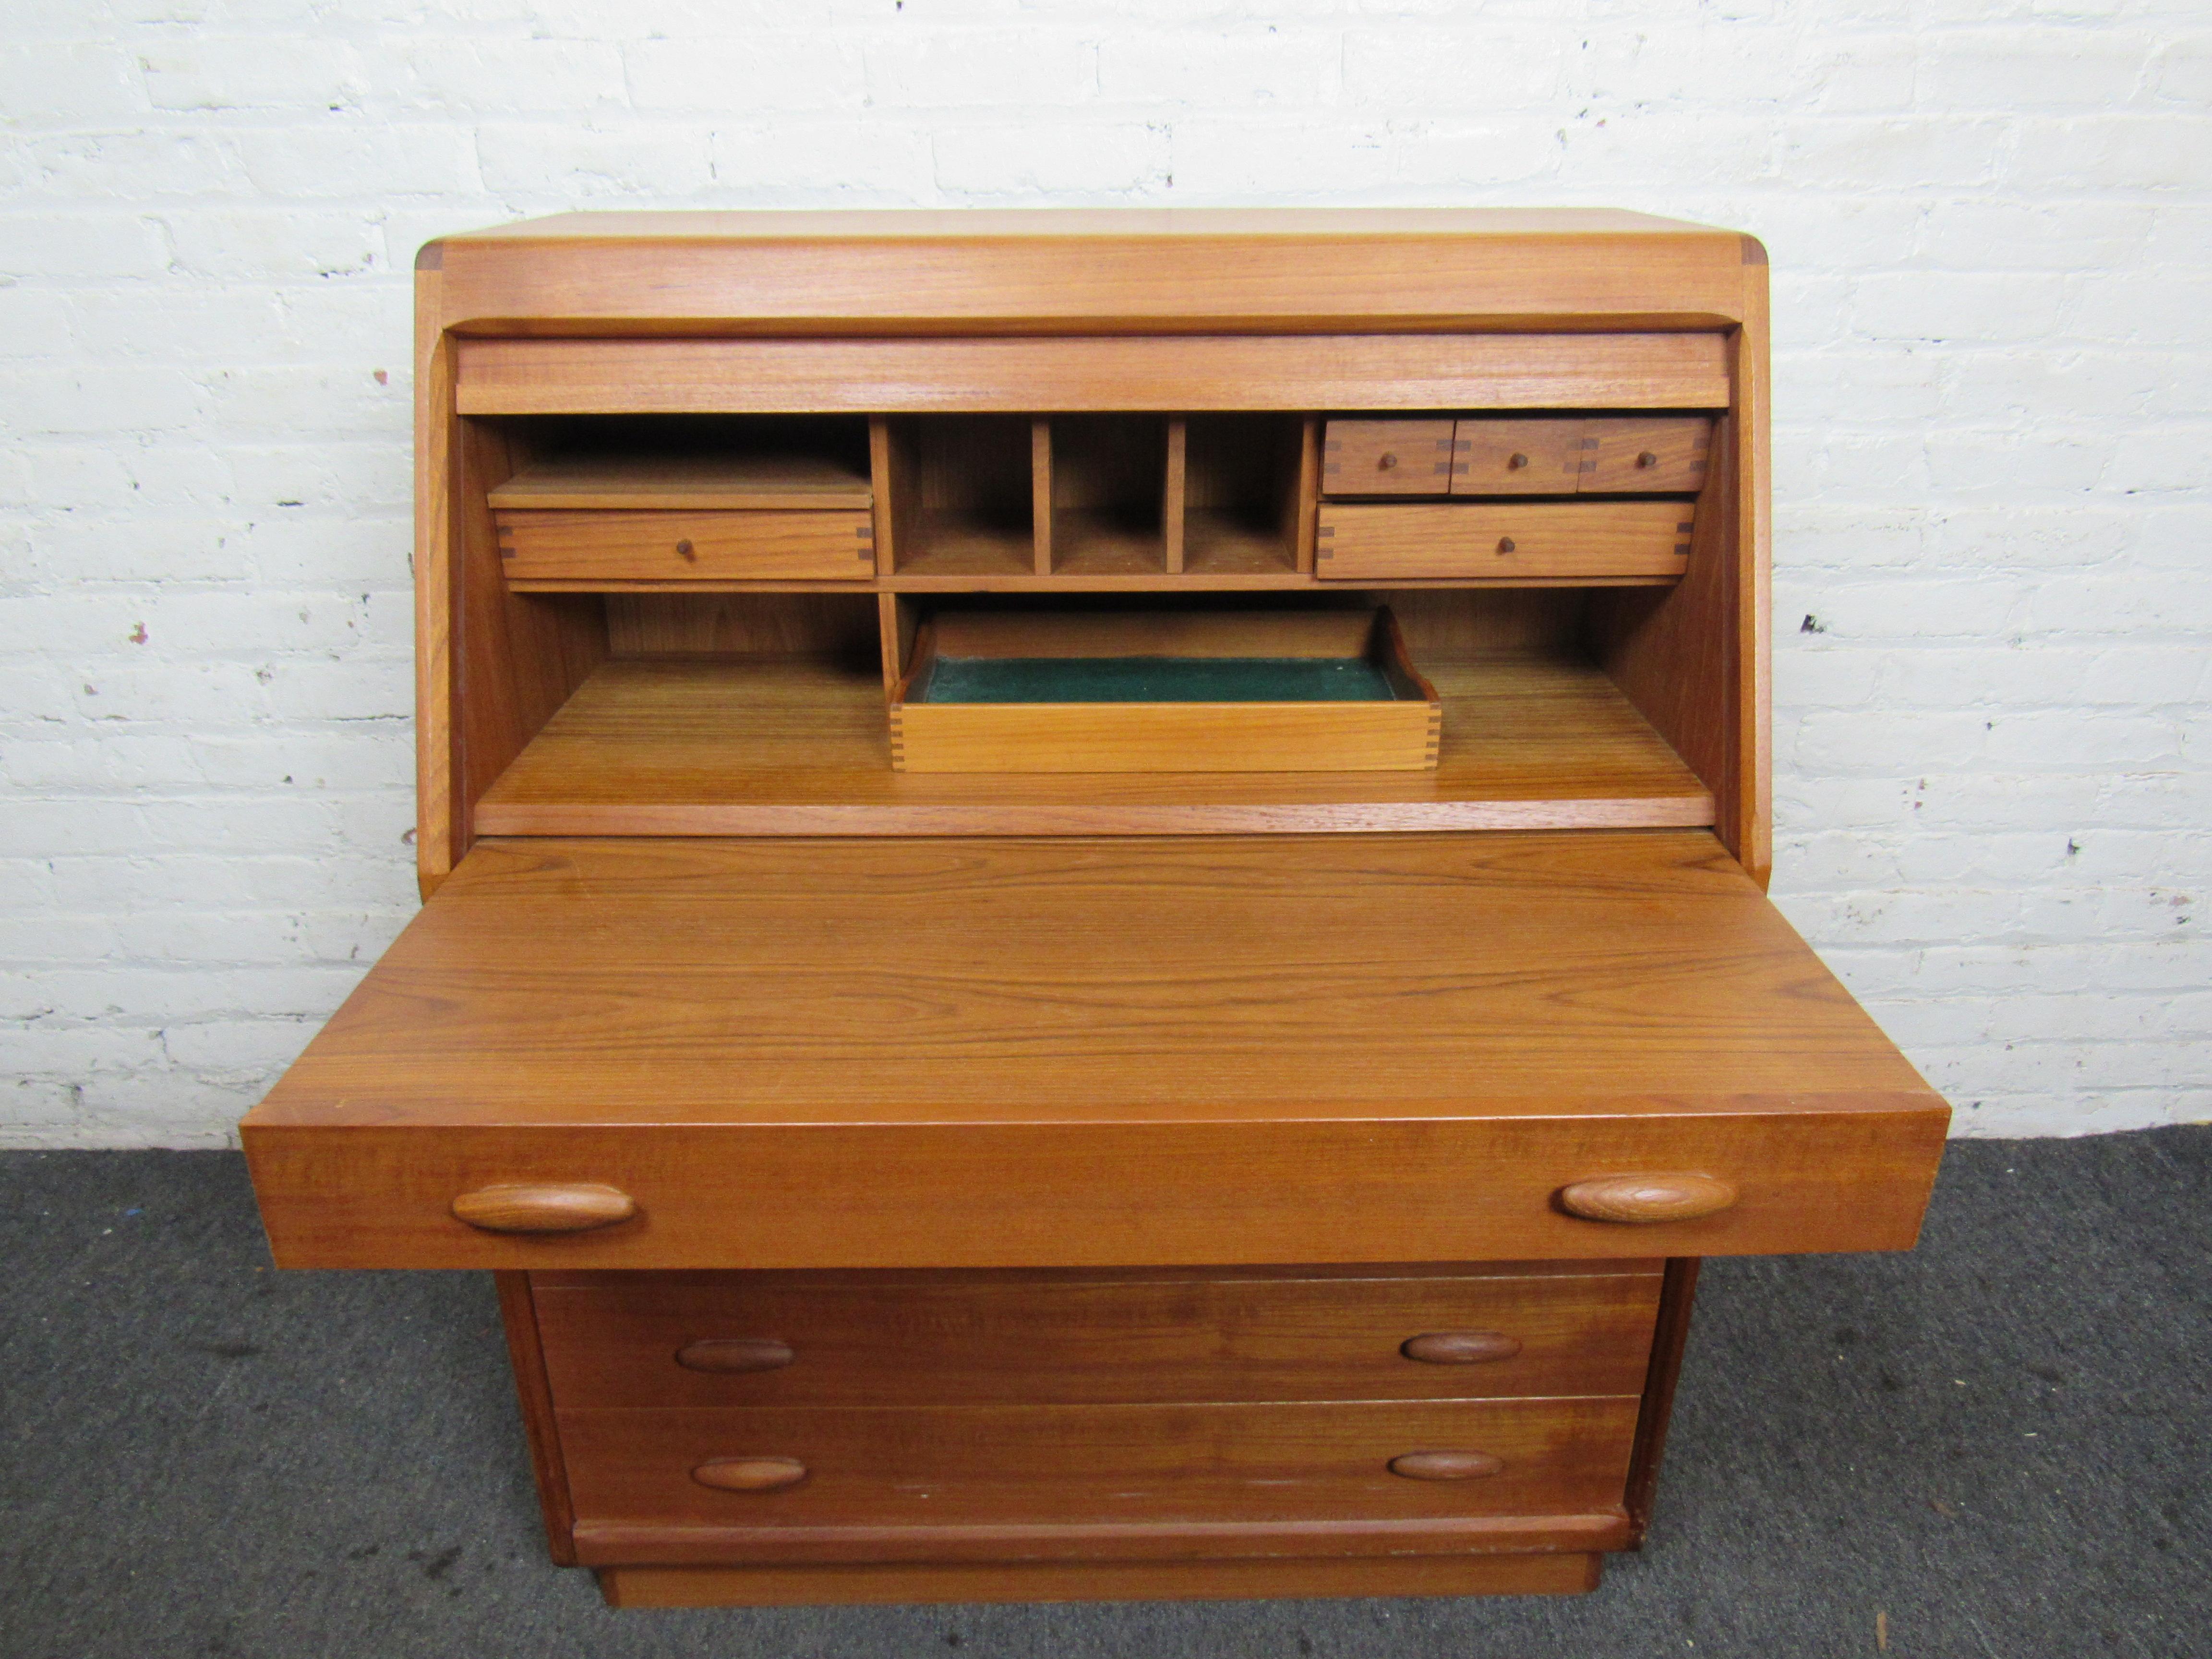 Gorgeous Mid-Century Modern writing desk by danish company, Dyrlund. This desk can also function as a dresser with its four drawers. It opens up by pulling out the top handles. 
(Please confirm item location - NY or NJ - with dealer).

